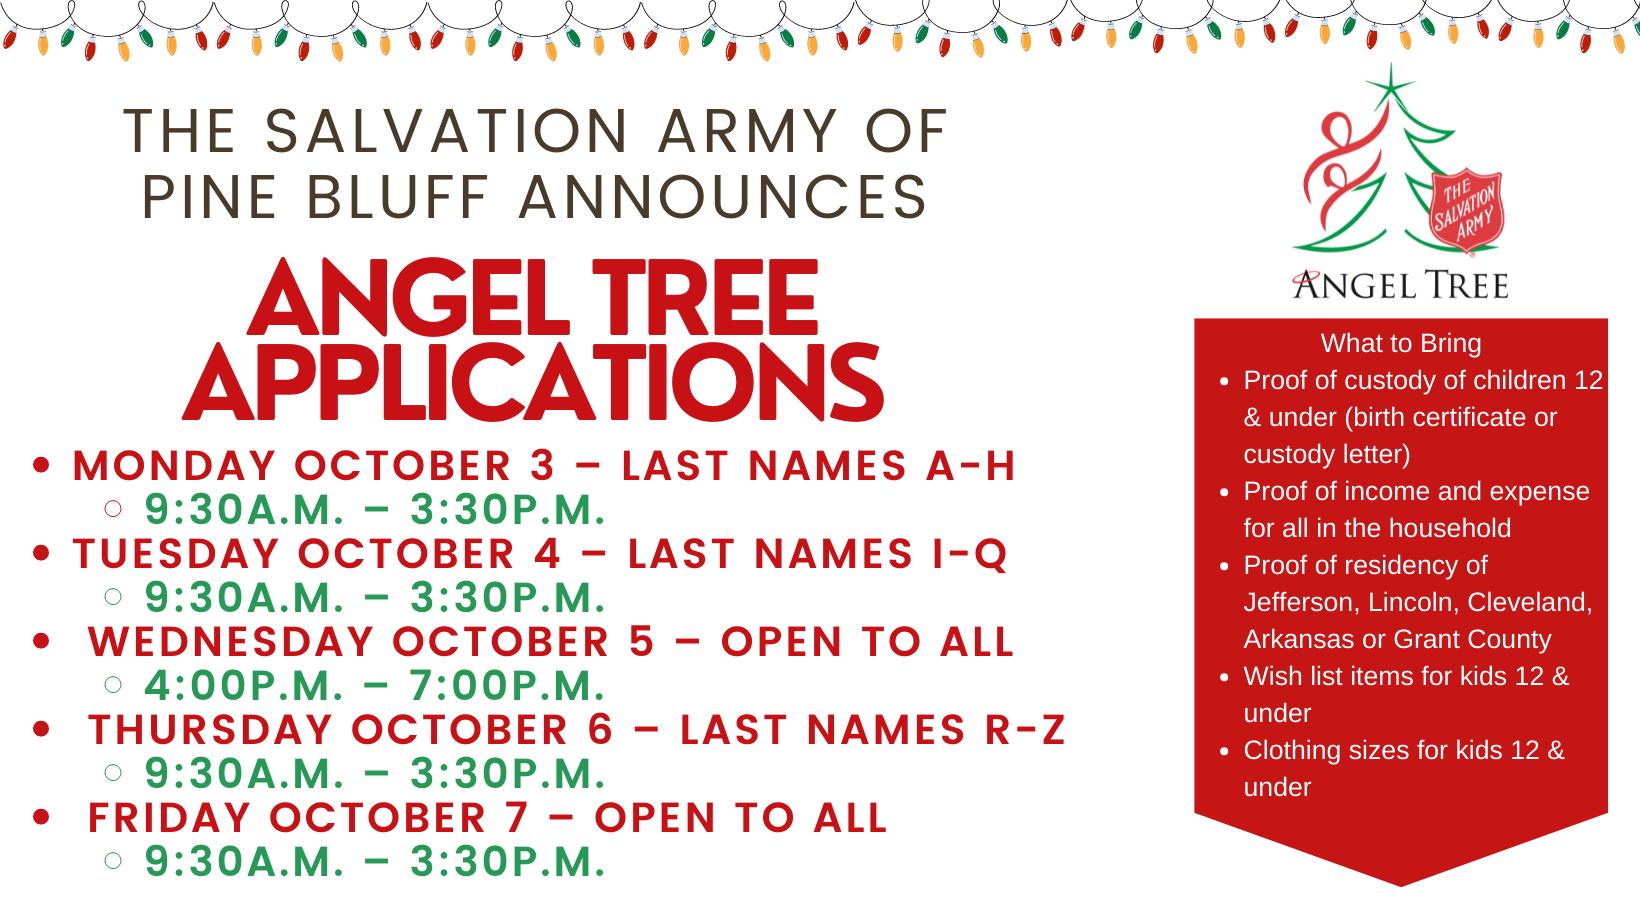 Pine Bluff Salvation Army Angel Tree Adoption Initiative is now accepting applications